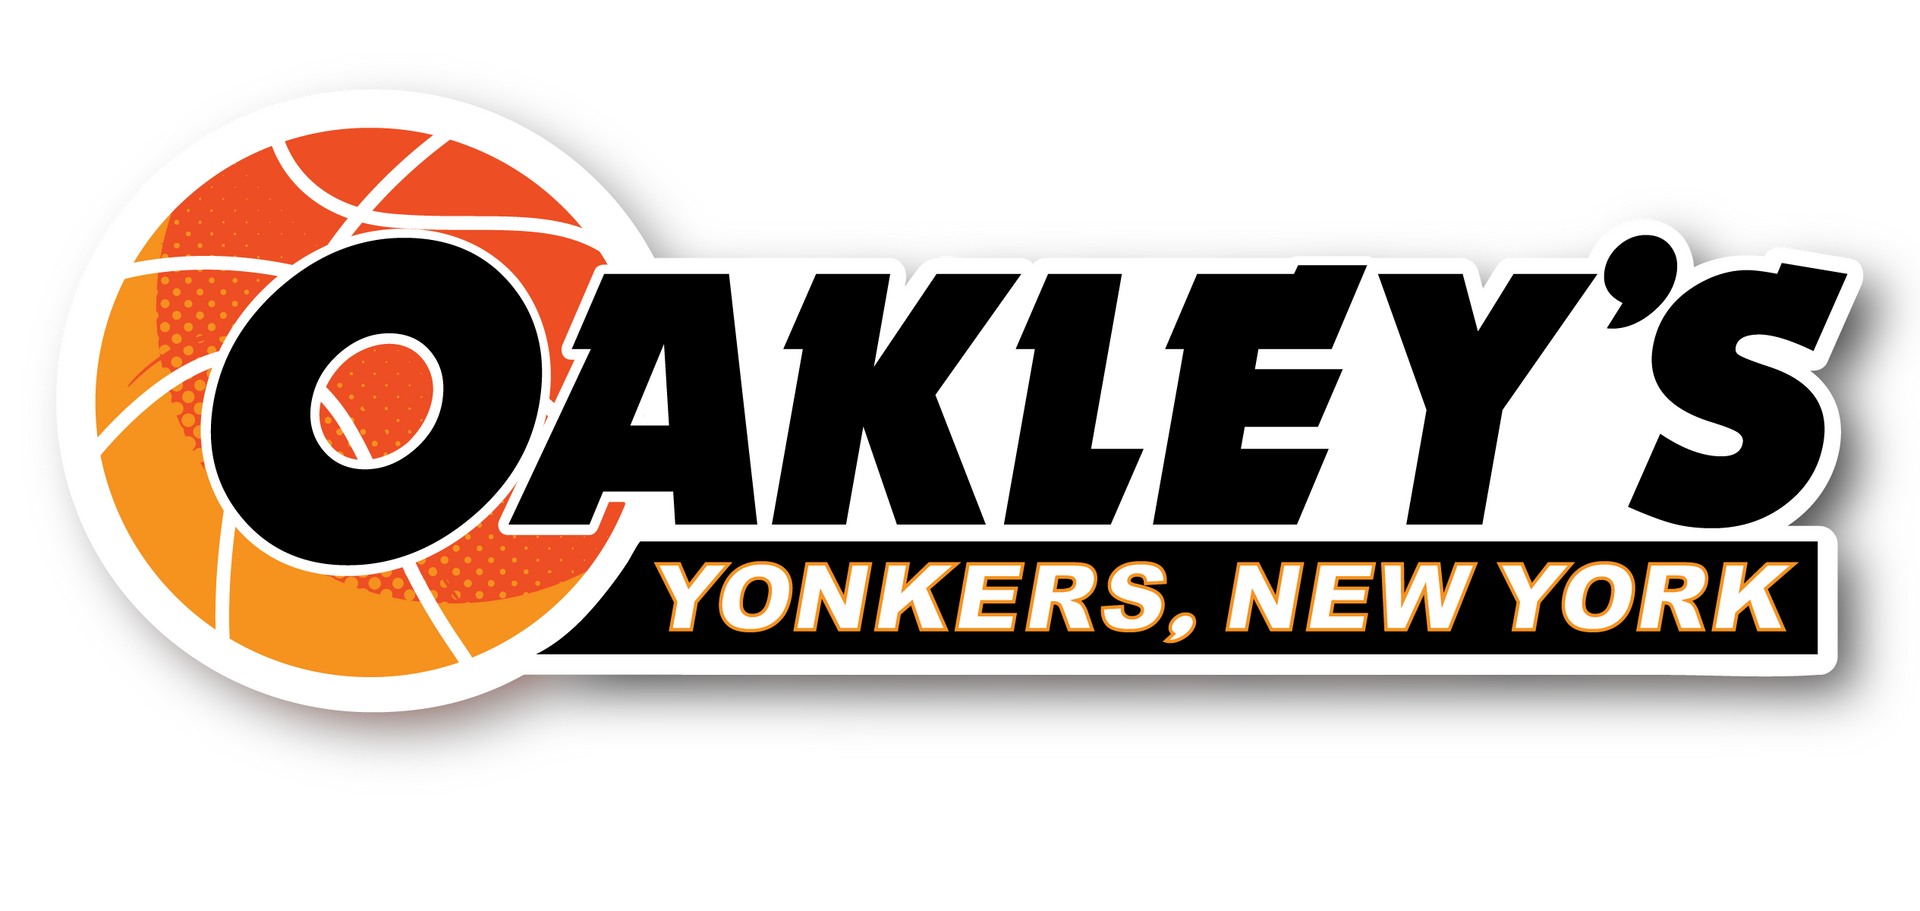 CHARLES OAKLEY CAR WASH WITH CHARLES OAKLEY SIGNATURE IN YONKERS NEW YORK